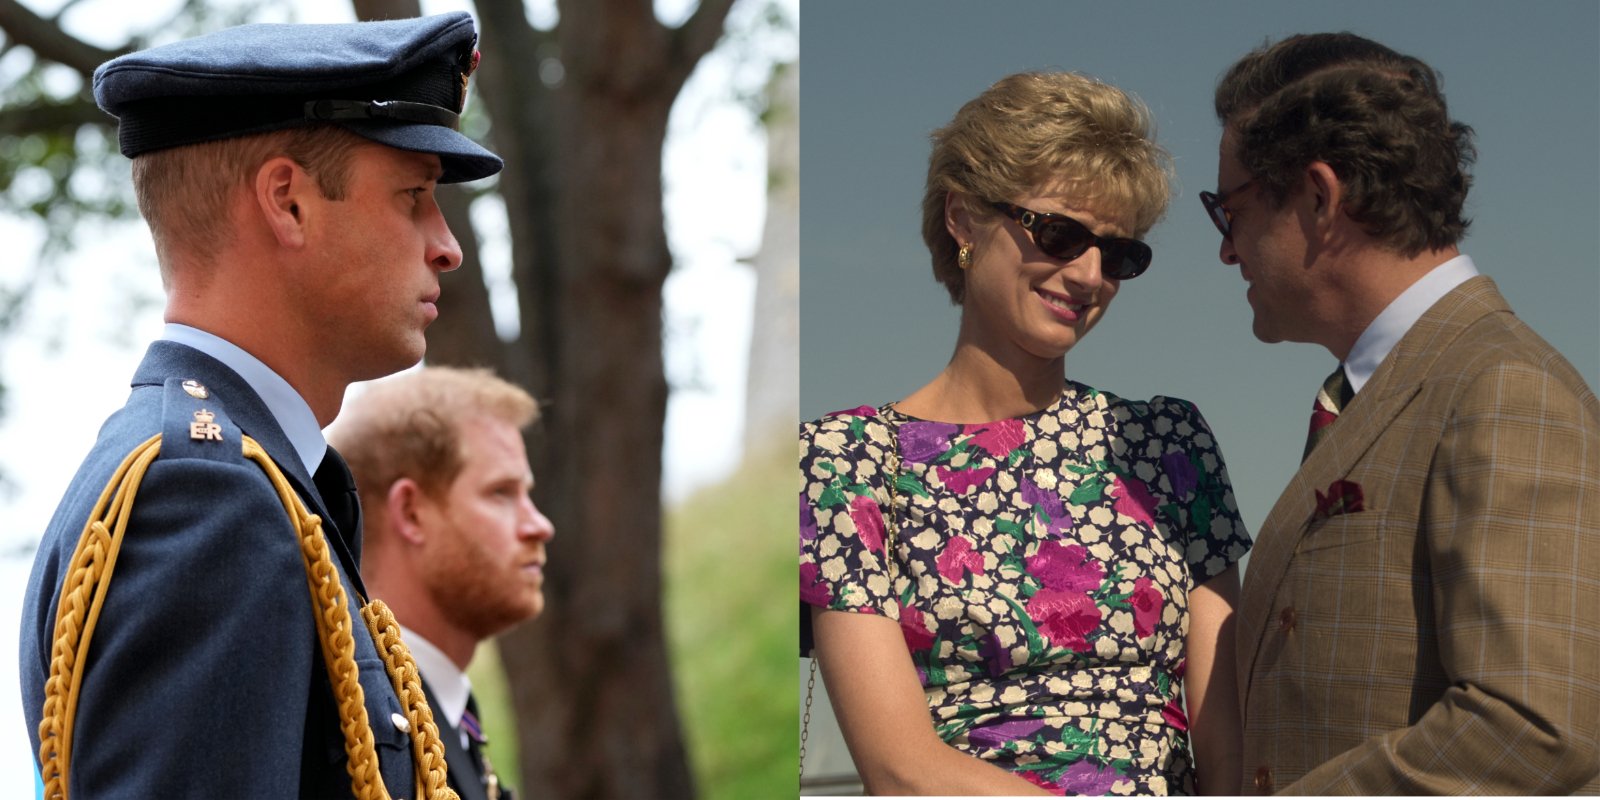 Princes Harry and William in a side by side photograph alongside 'The Crown' stars Elizabeth Debicki and Dominic West.